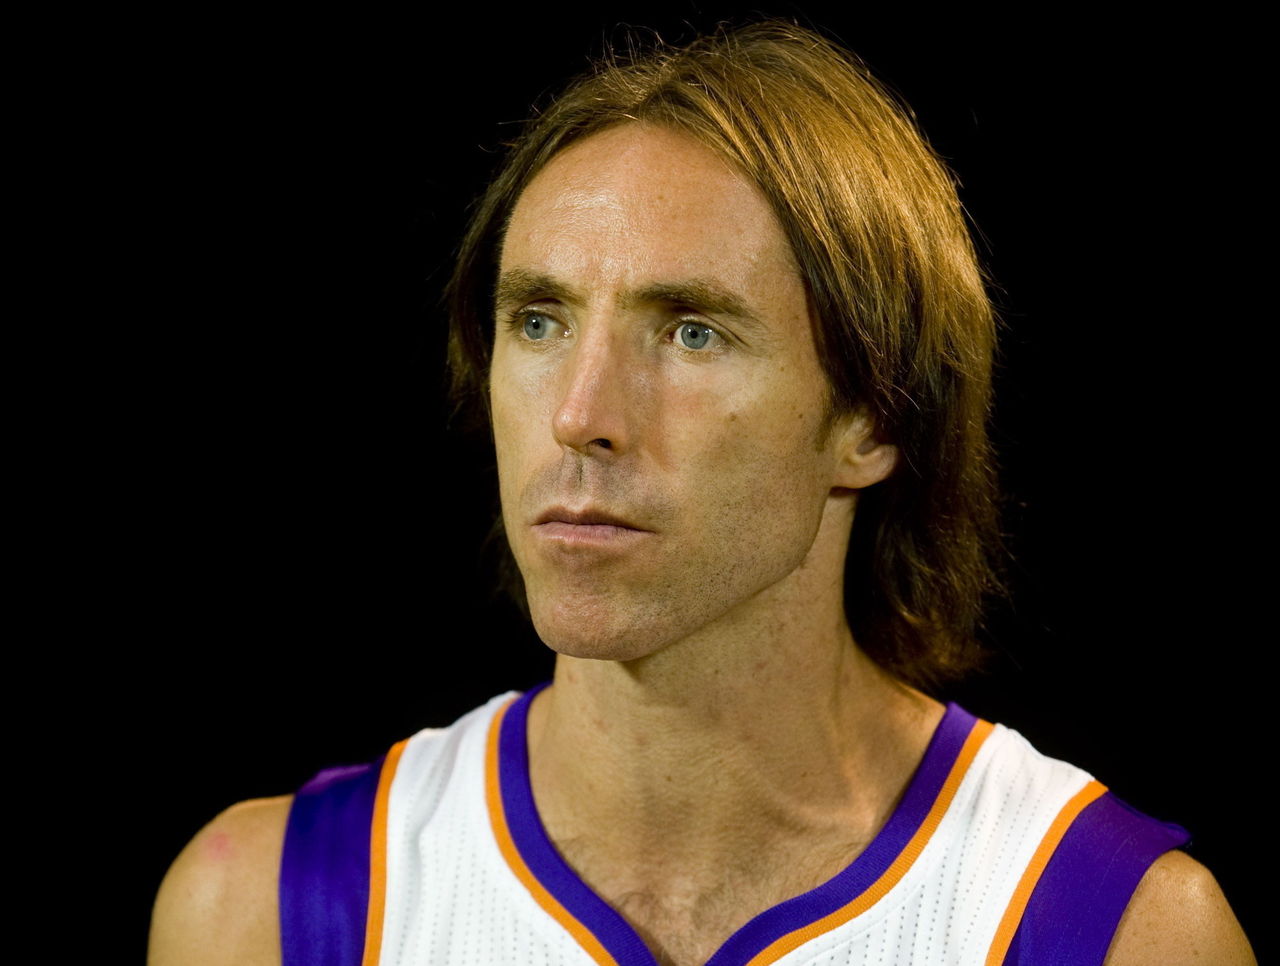 Welcome back: Steve Nash throws halfcourt alley-oop pass in return (VIDEO)  - NBC Sports